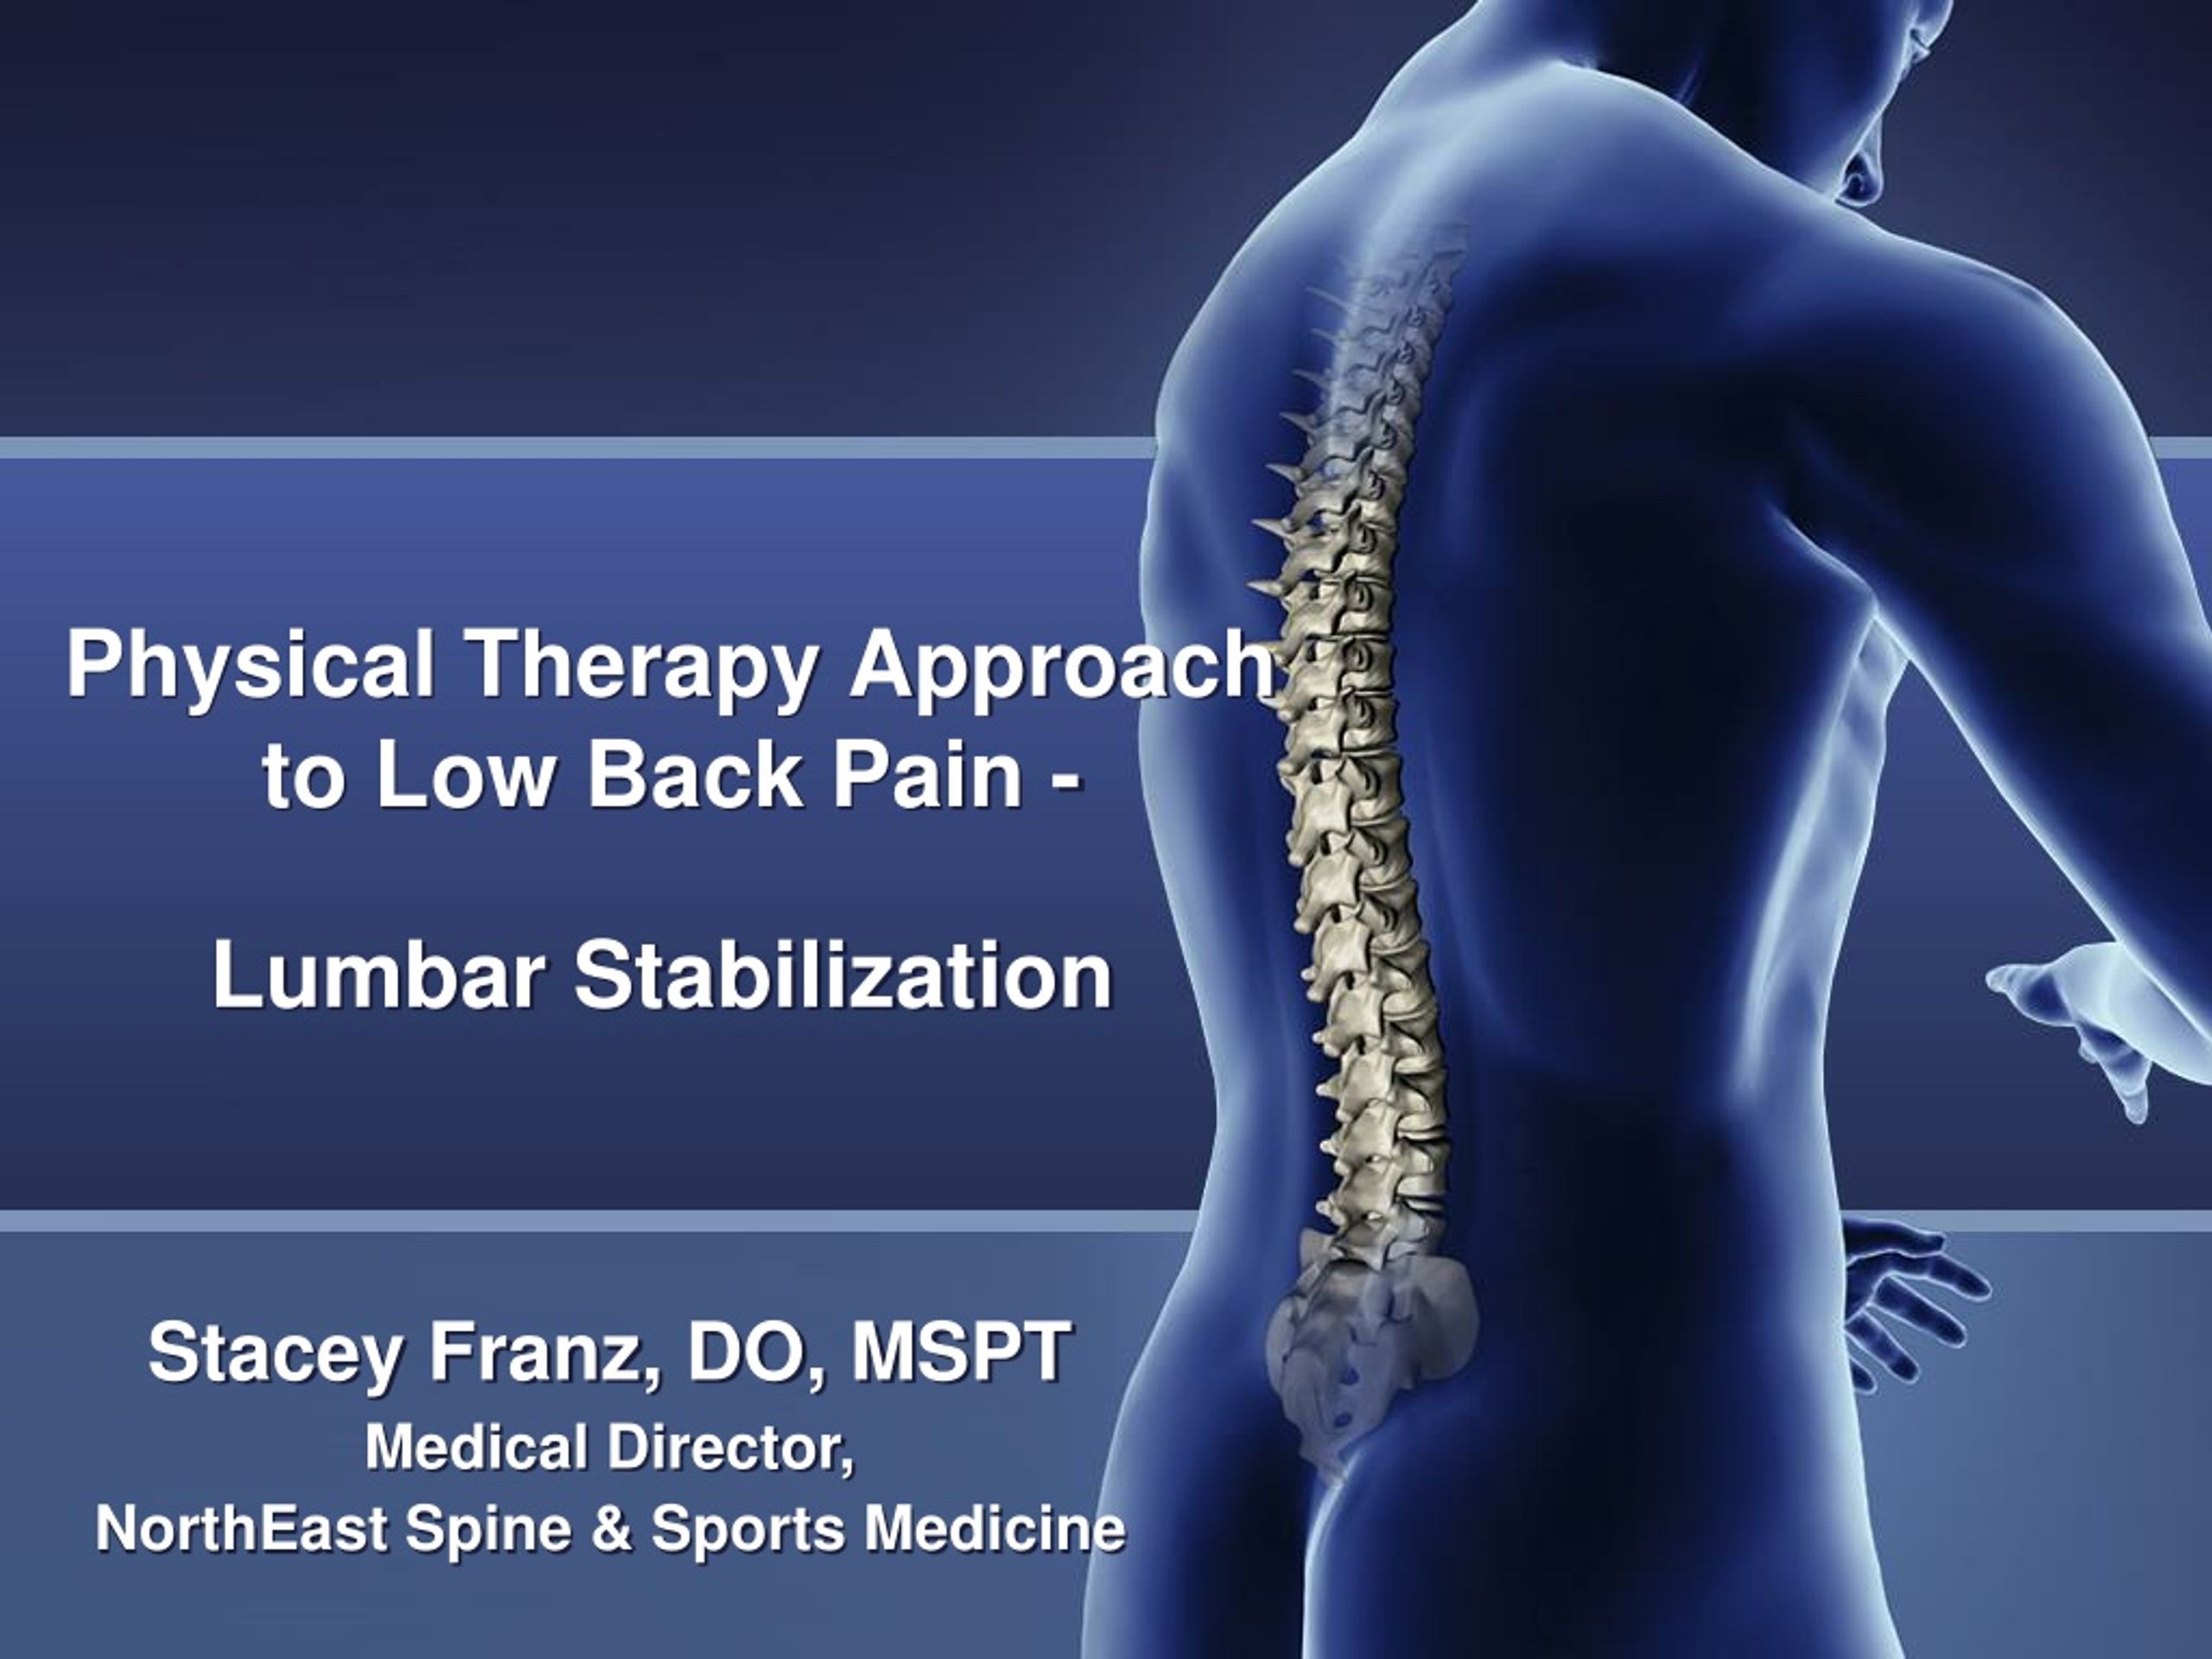 https://image4.slideserve.com/8845808/physical-therapy-approach-to-low-back-pain-l.jpg